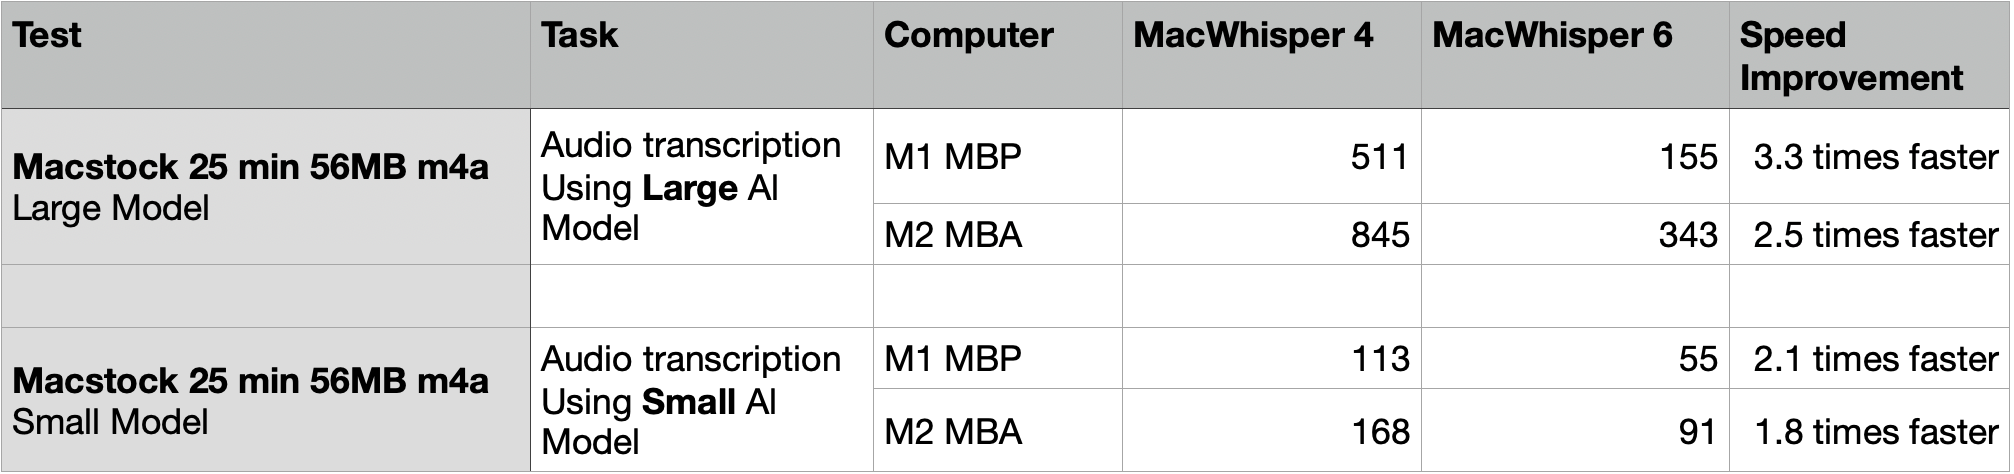 MacWhisper Tests v4 vs v6:  Large AI model, MBP was 3.3x faster and MBA was 2.5x. On small AI model MBP was 2.1x faster and MBA was 1.8x faster